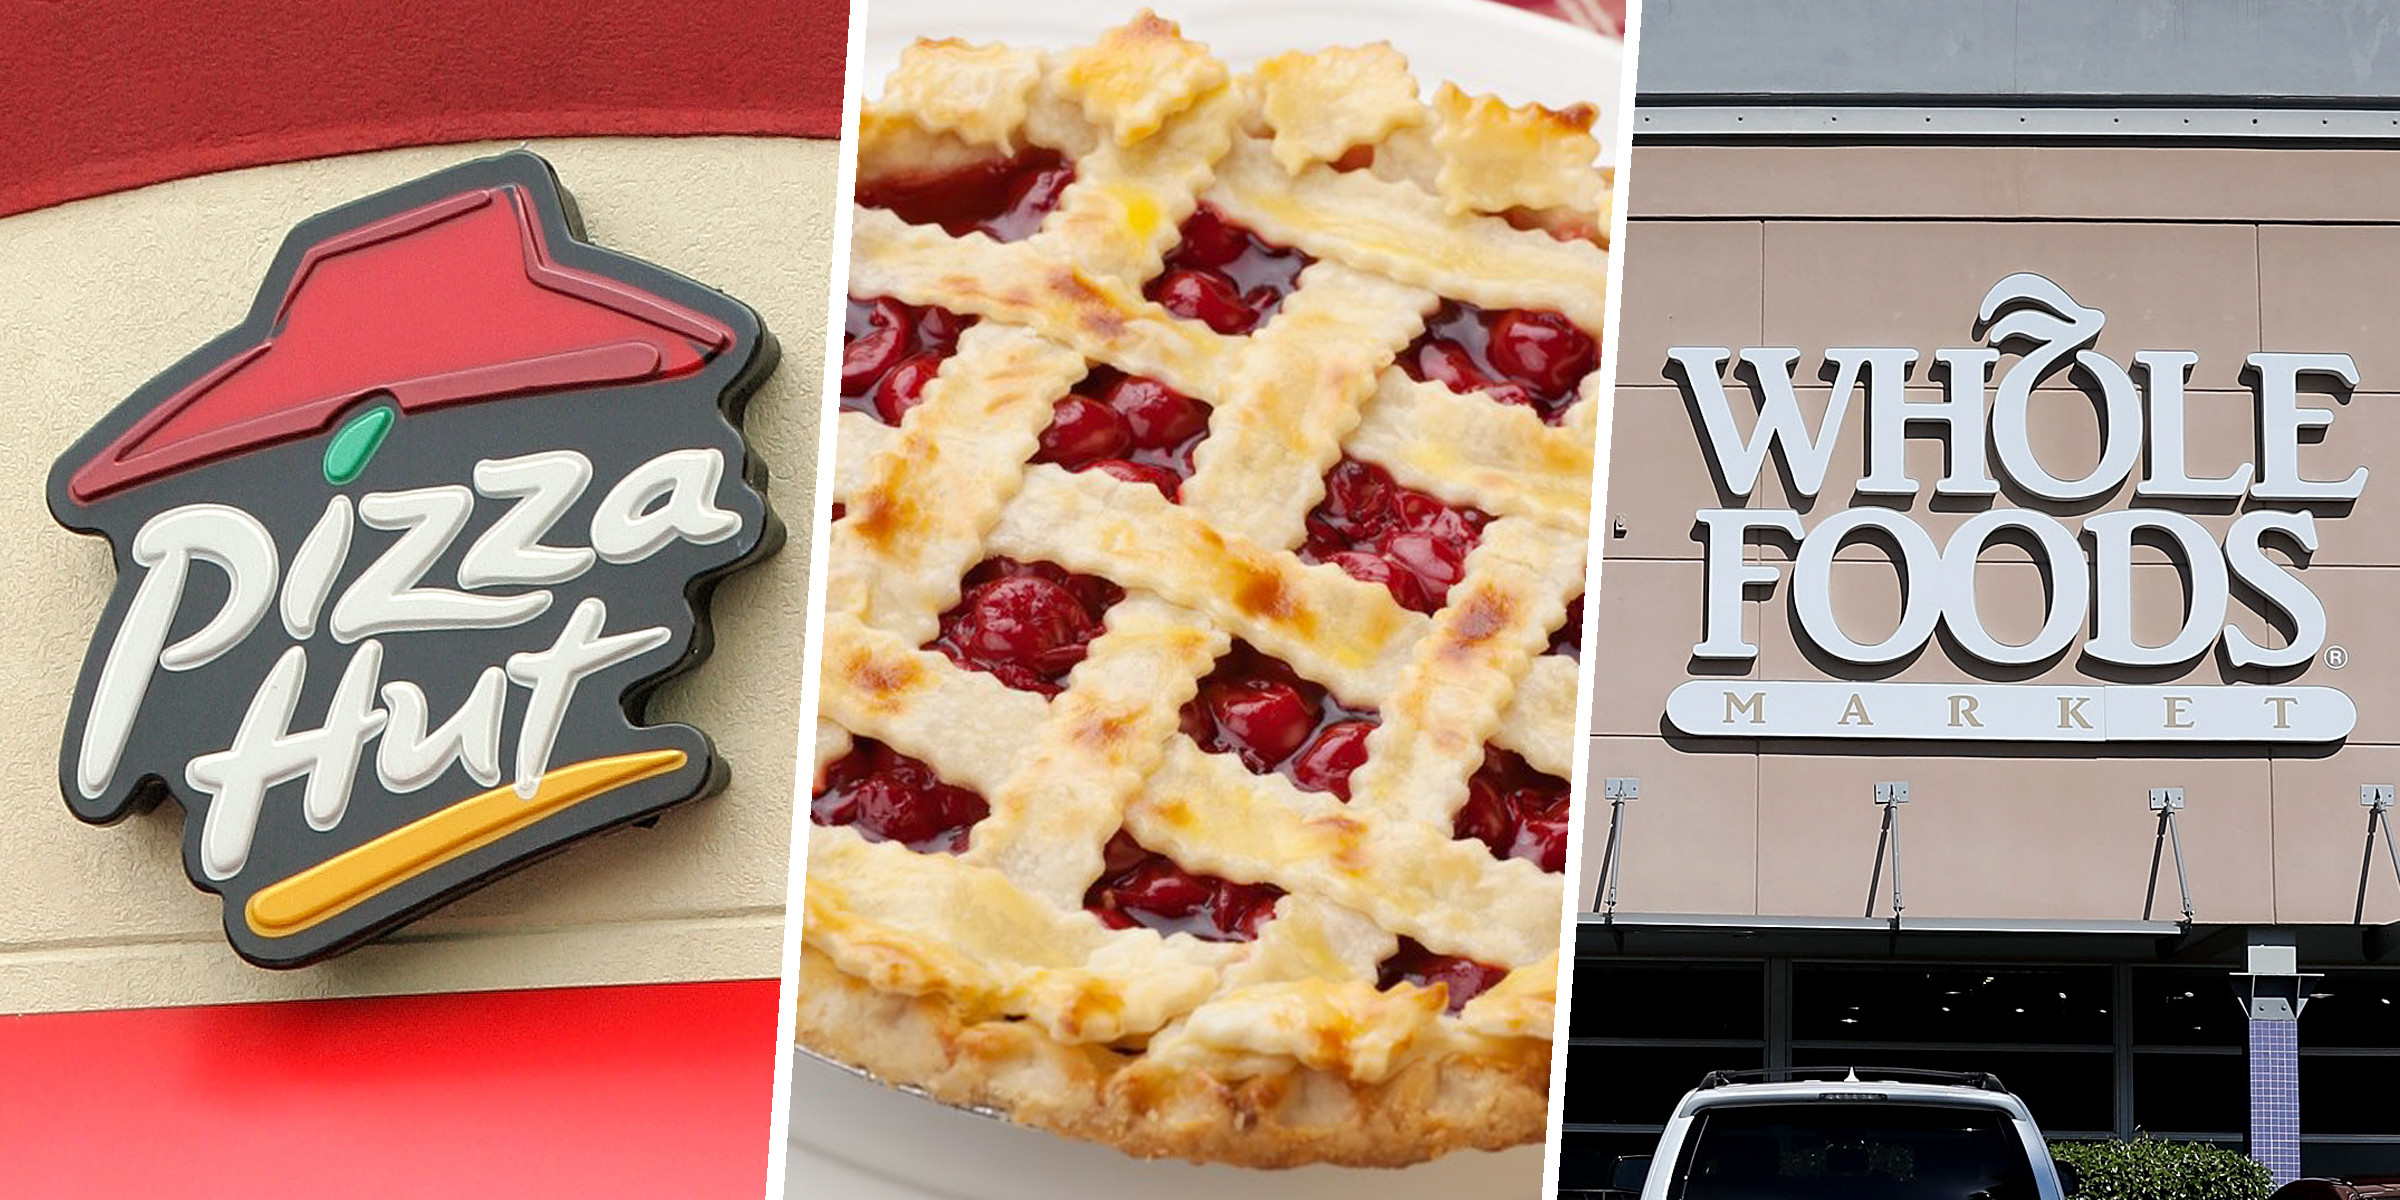 Pi Day Food Deals
 Restaurant chains offer deals to celebrate National Pi Day